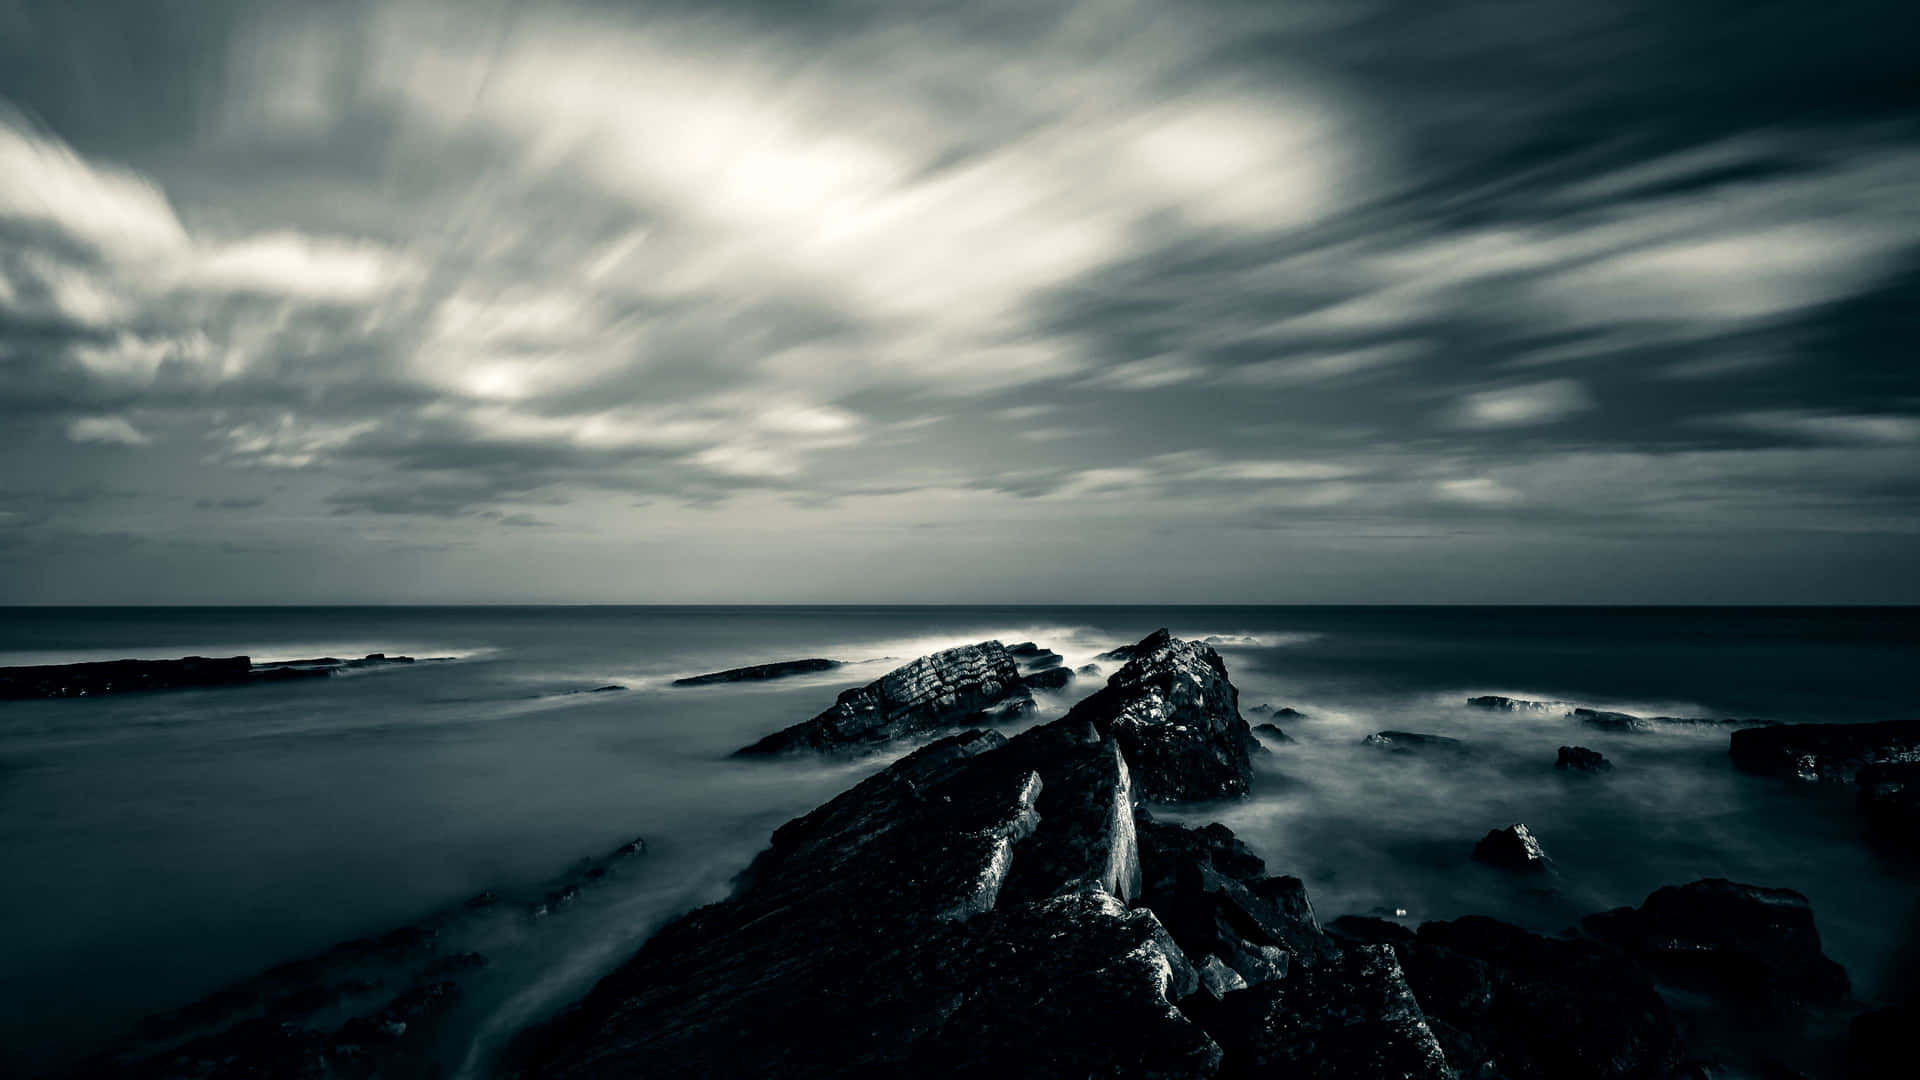 A Black And White Image Of A Rocky Shore With Clouds Wallpaper